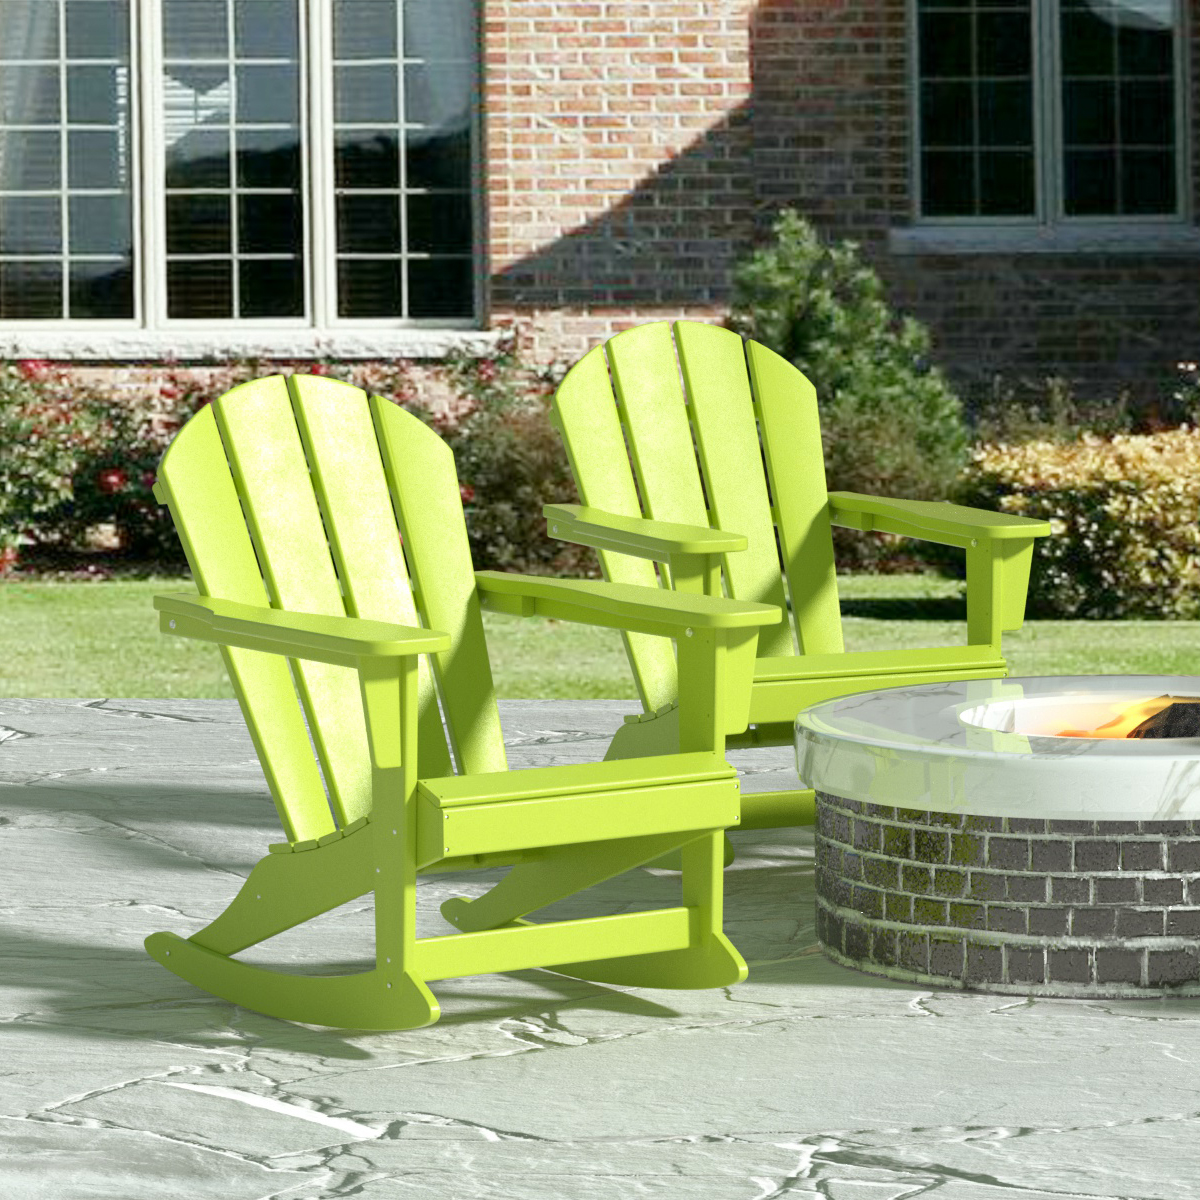 GARDEN Plastic Adirondack Rocking Chair for Outdoor Patio Porch Seating, Lime - image 1 of 7